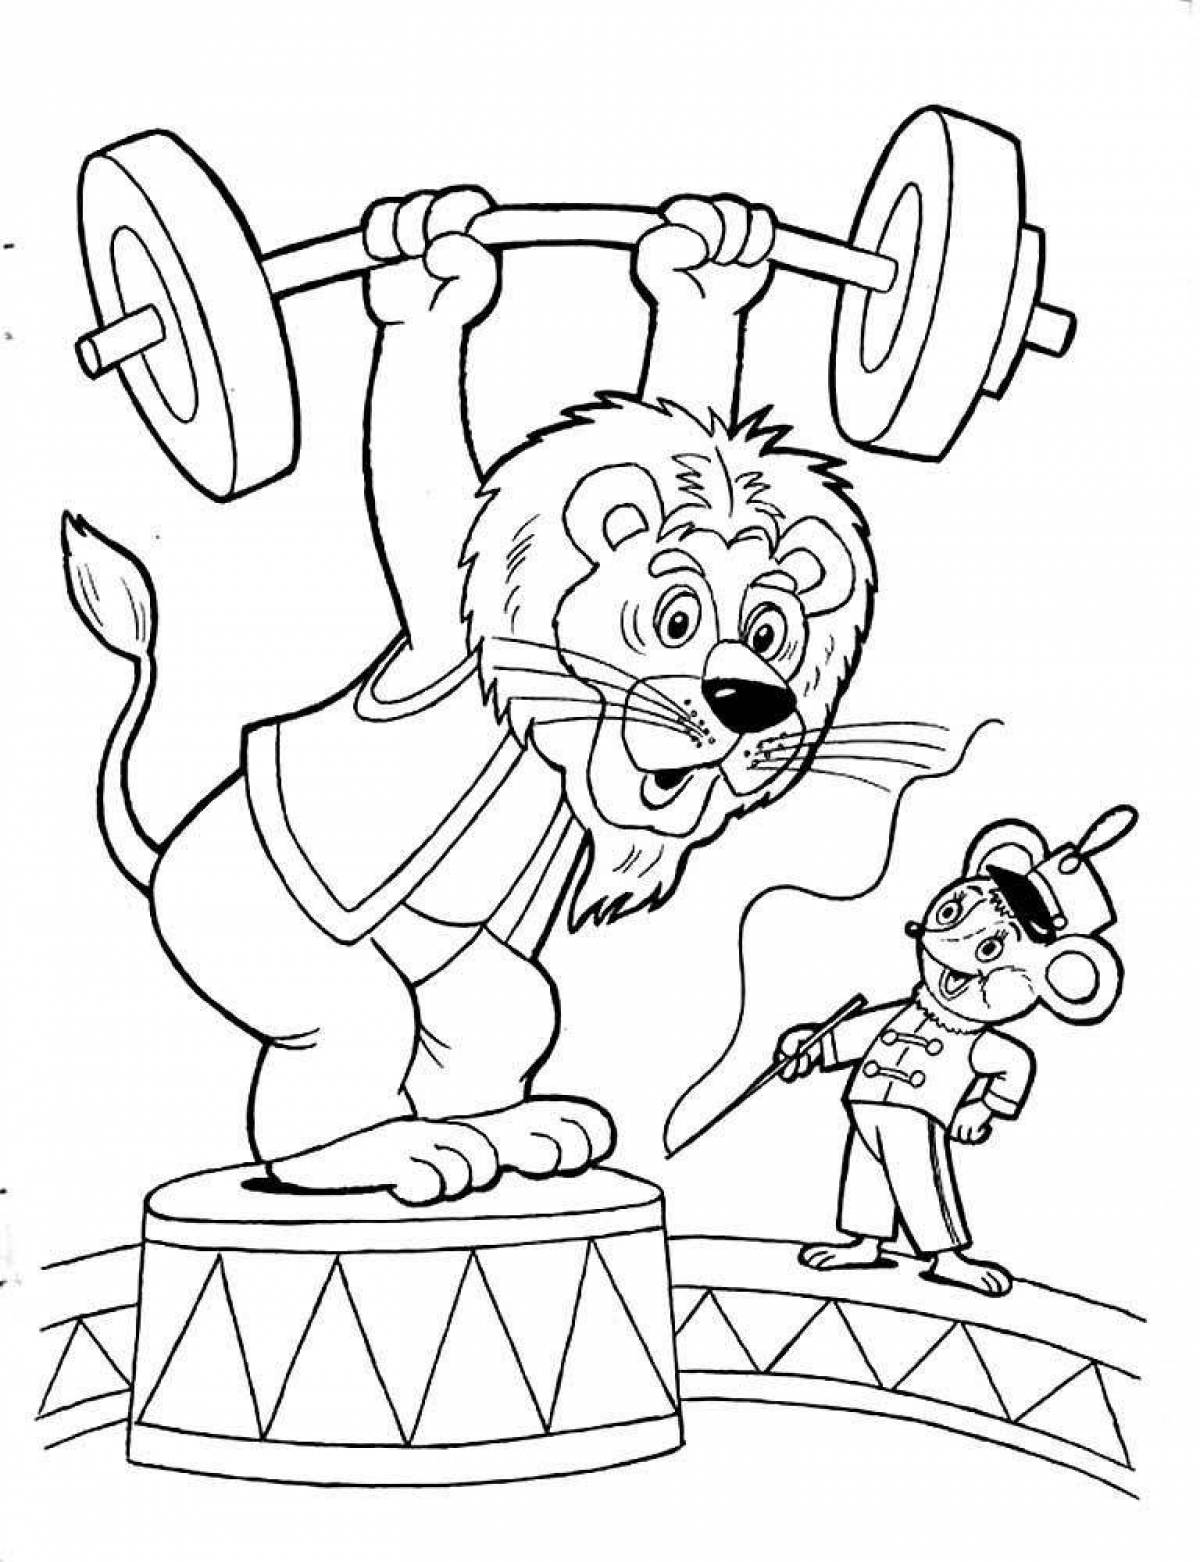 Coloring page glorious circus